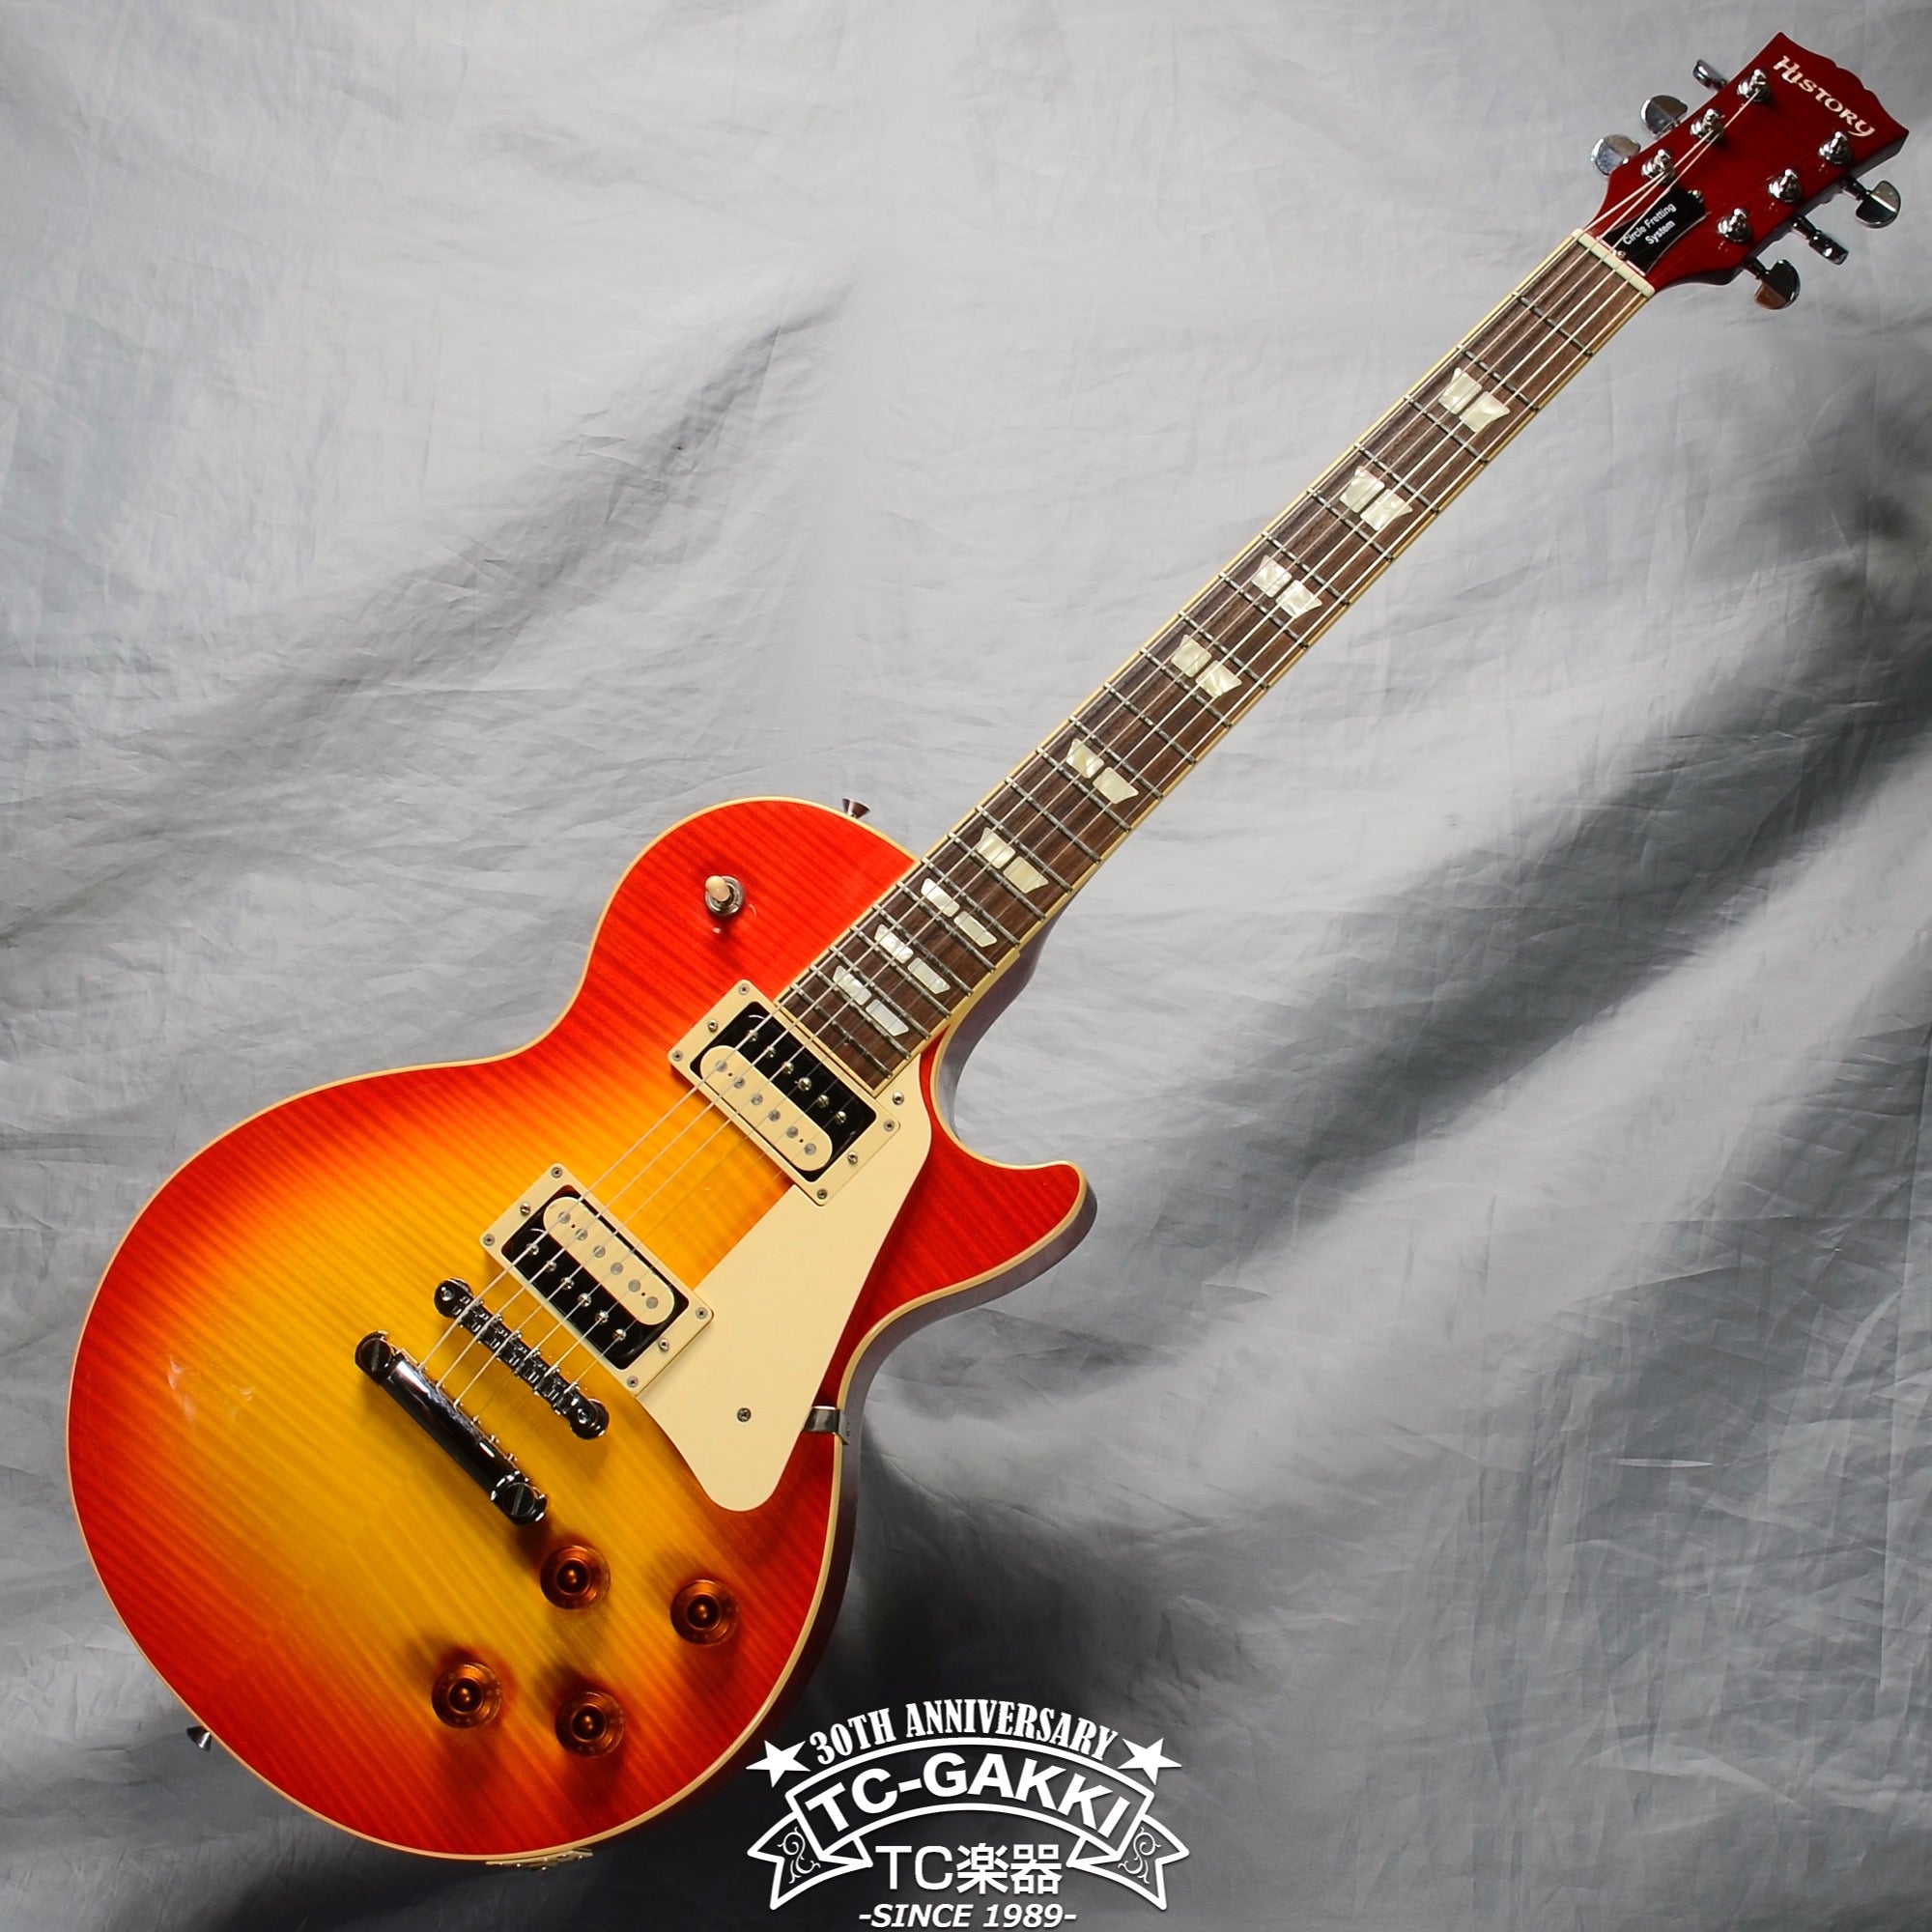 HISTORY 2006 TH LS 2006 0 Guitar For Sale TCGAKKI